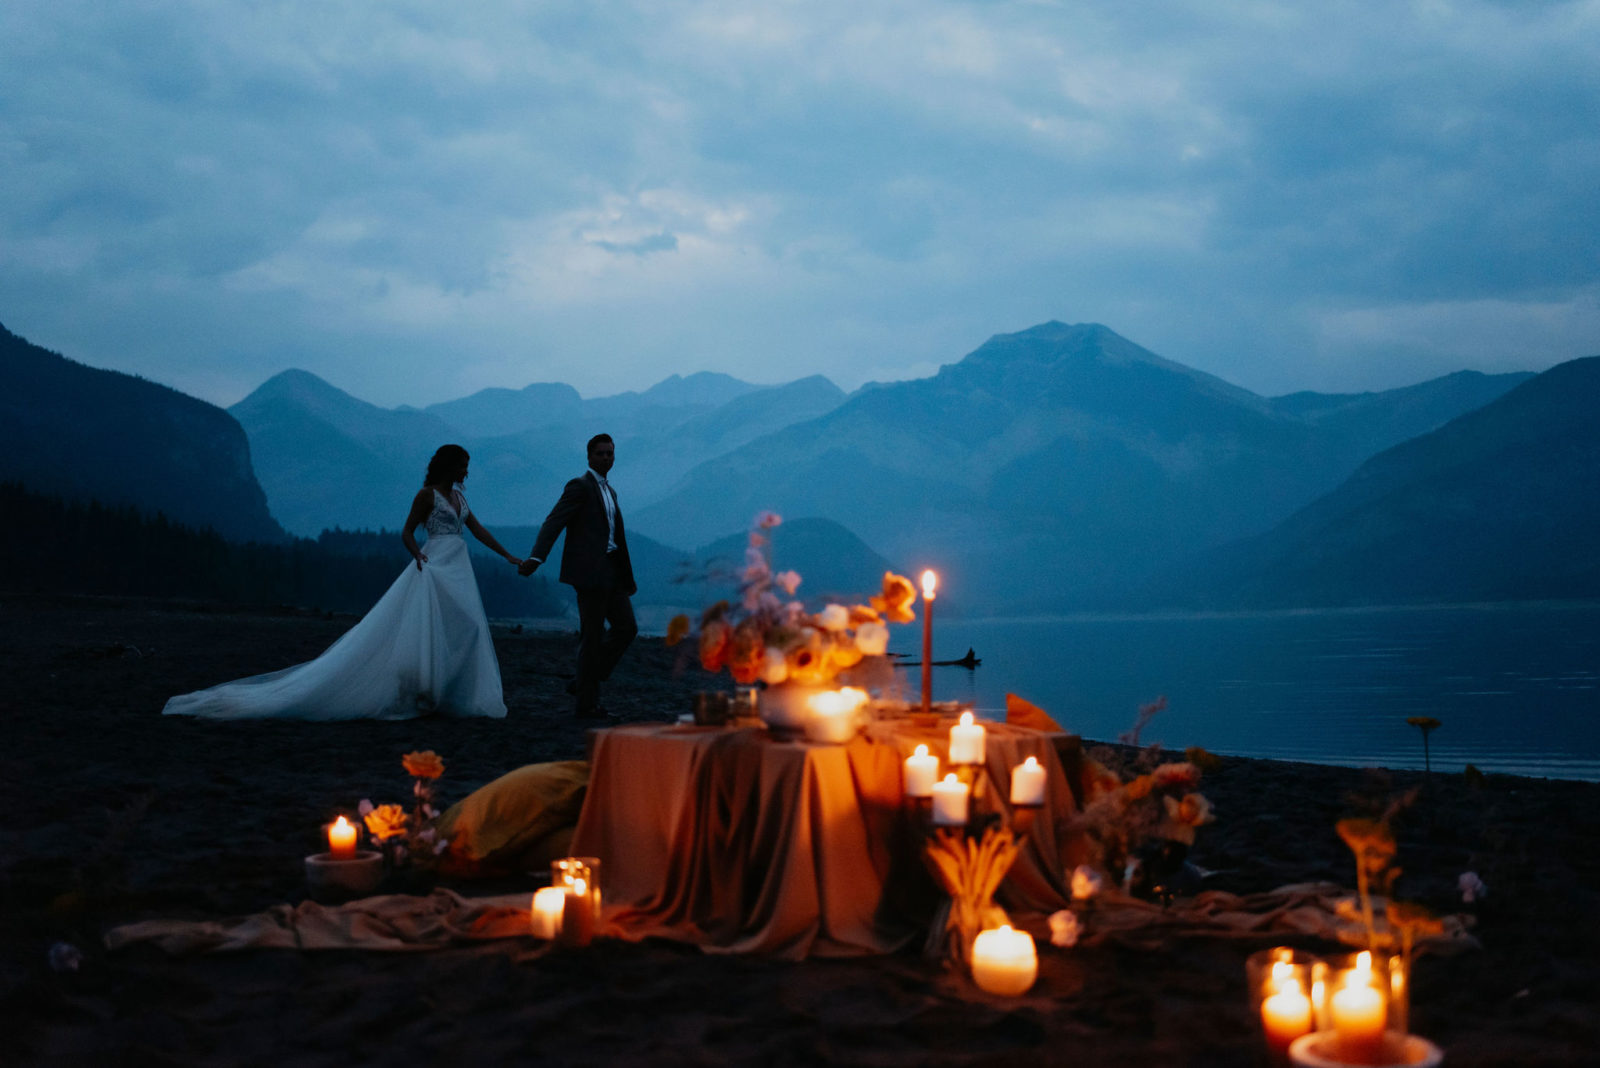 Candlelight blue hour wedding portraits in the mountains